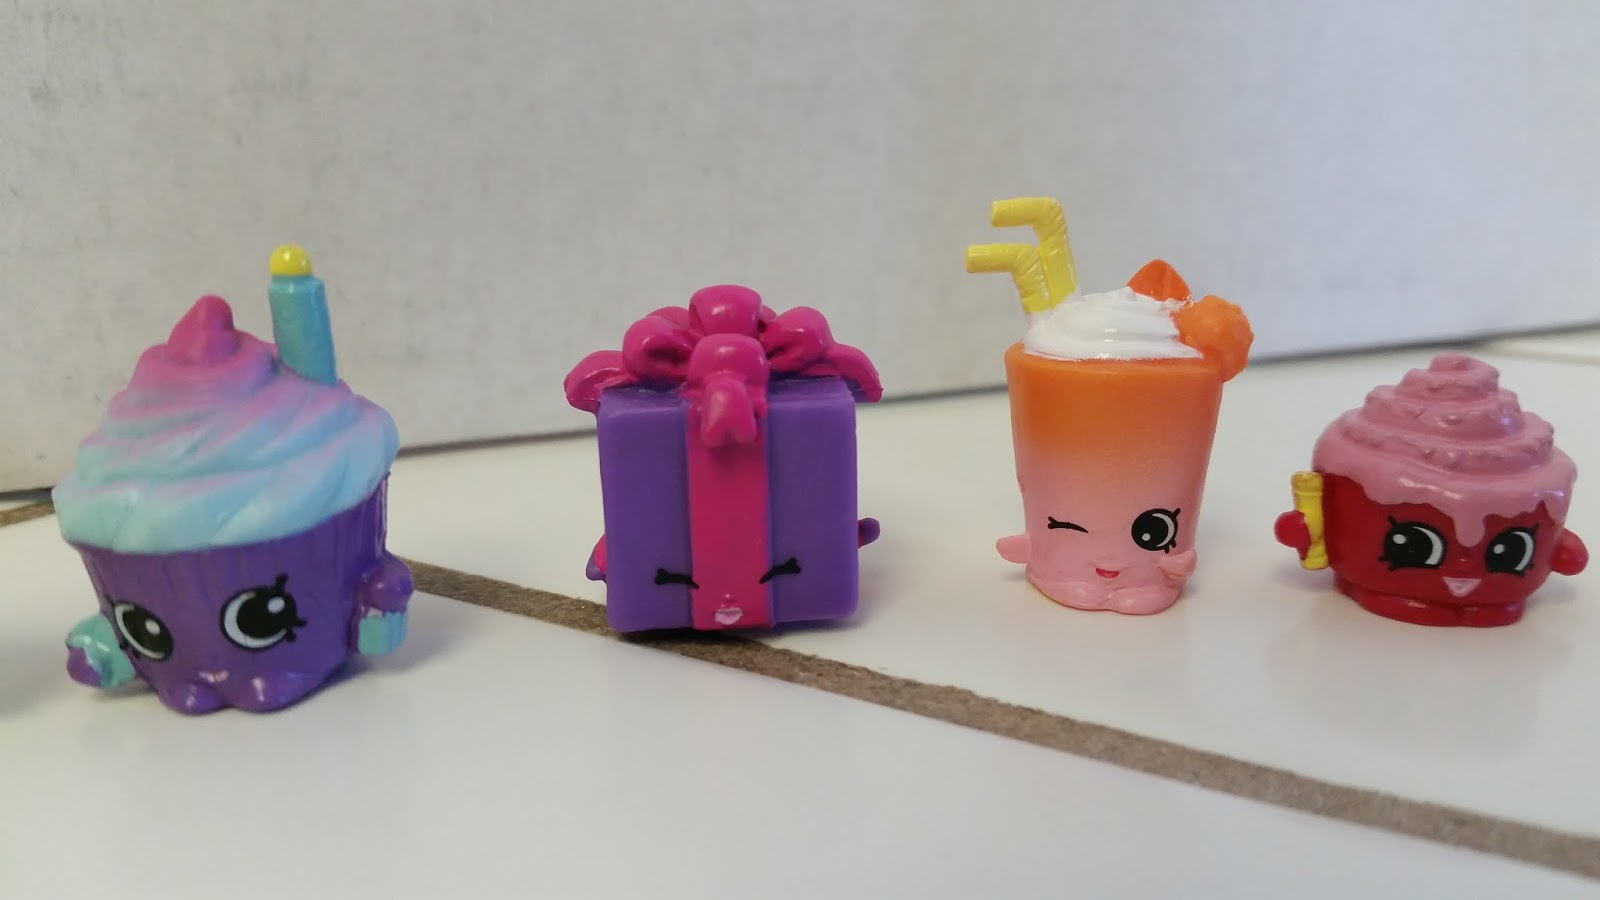 Never Grow Up: A Mom's Guide to Dolls and More: Shopkins Season 4 and  Shopkins Happy Meal Toys